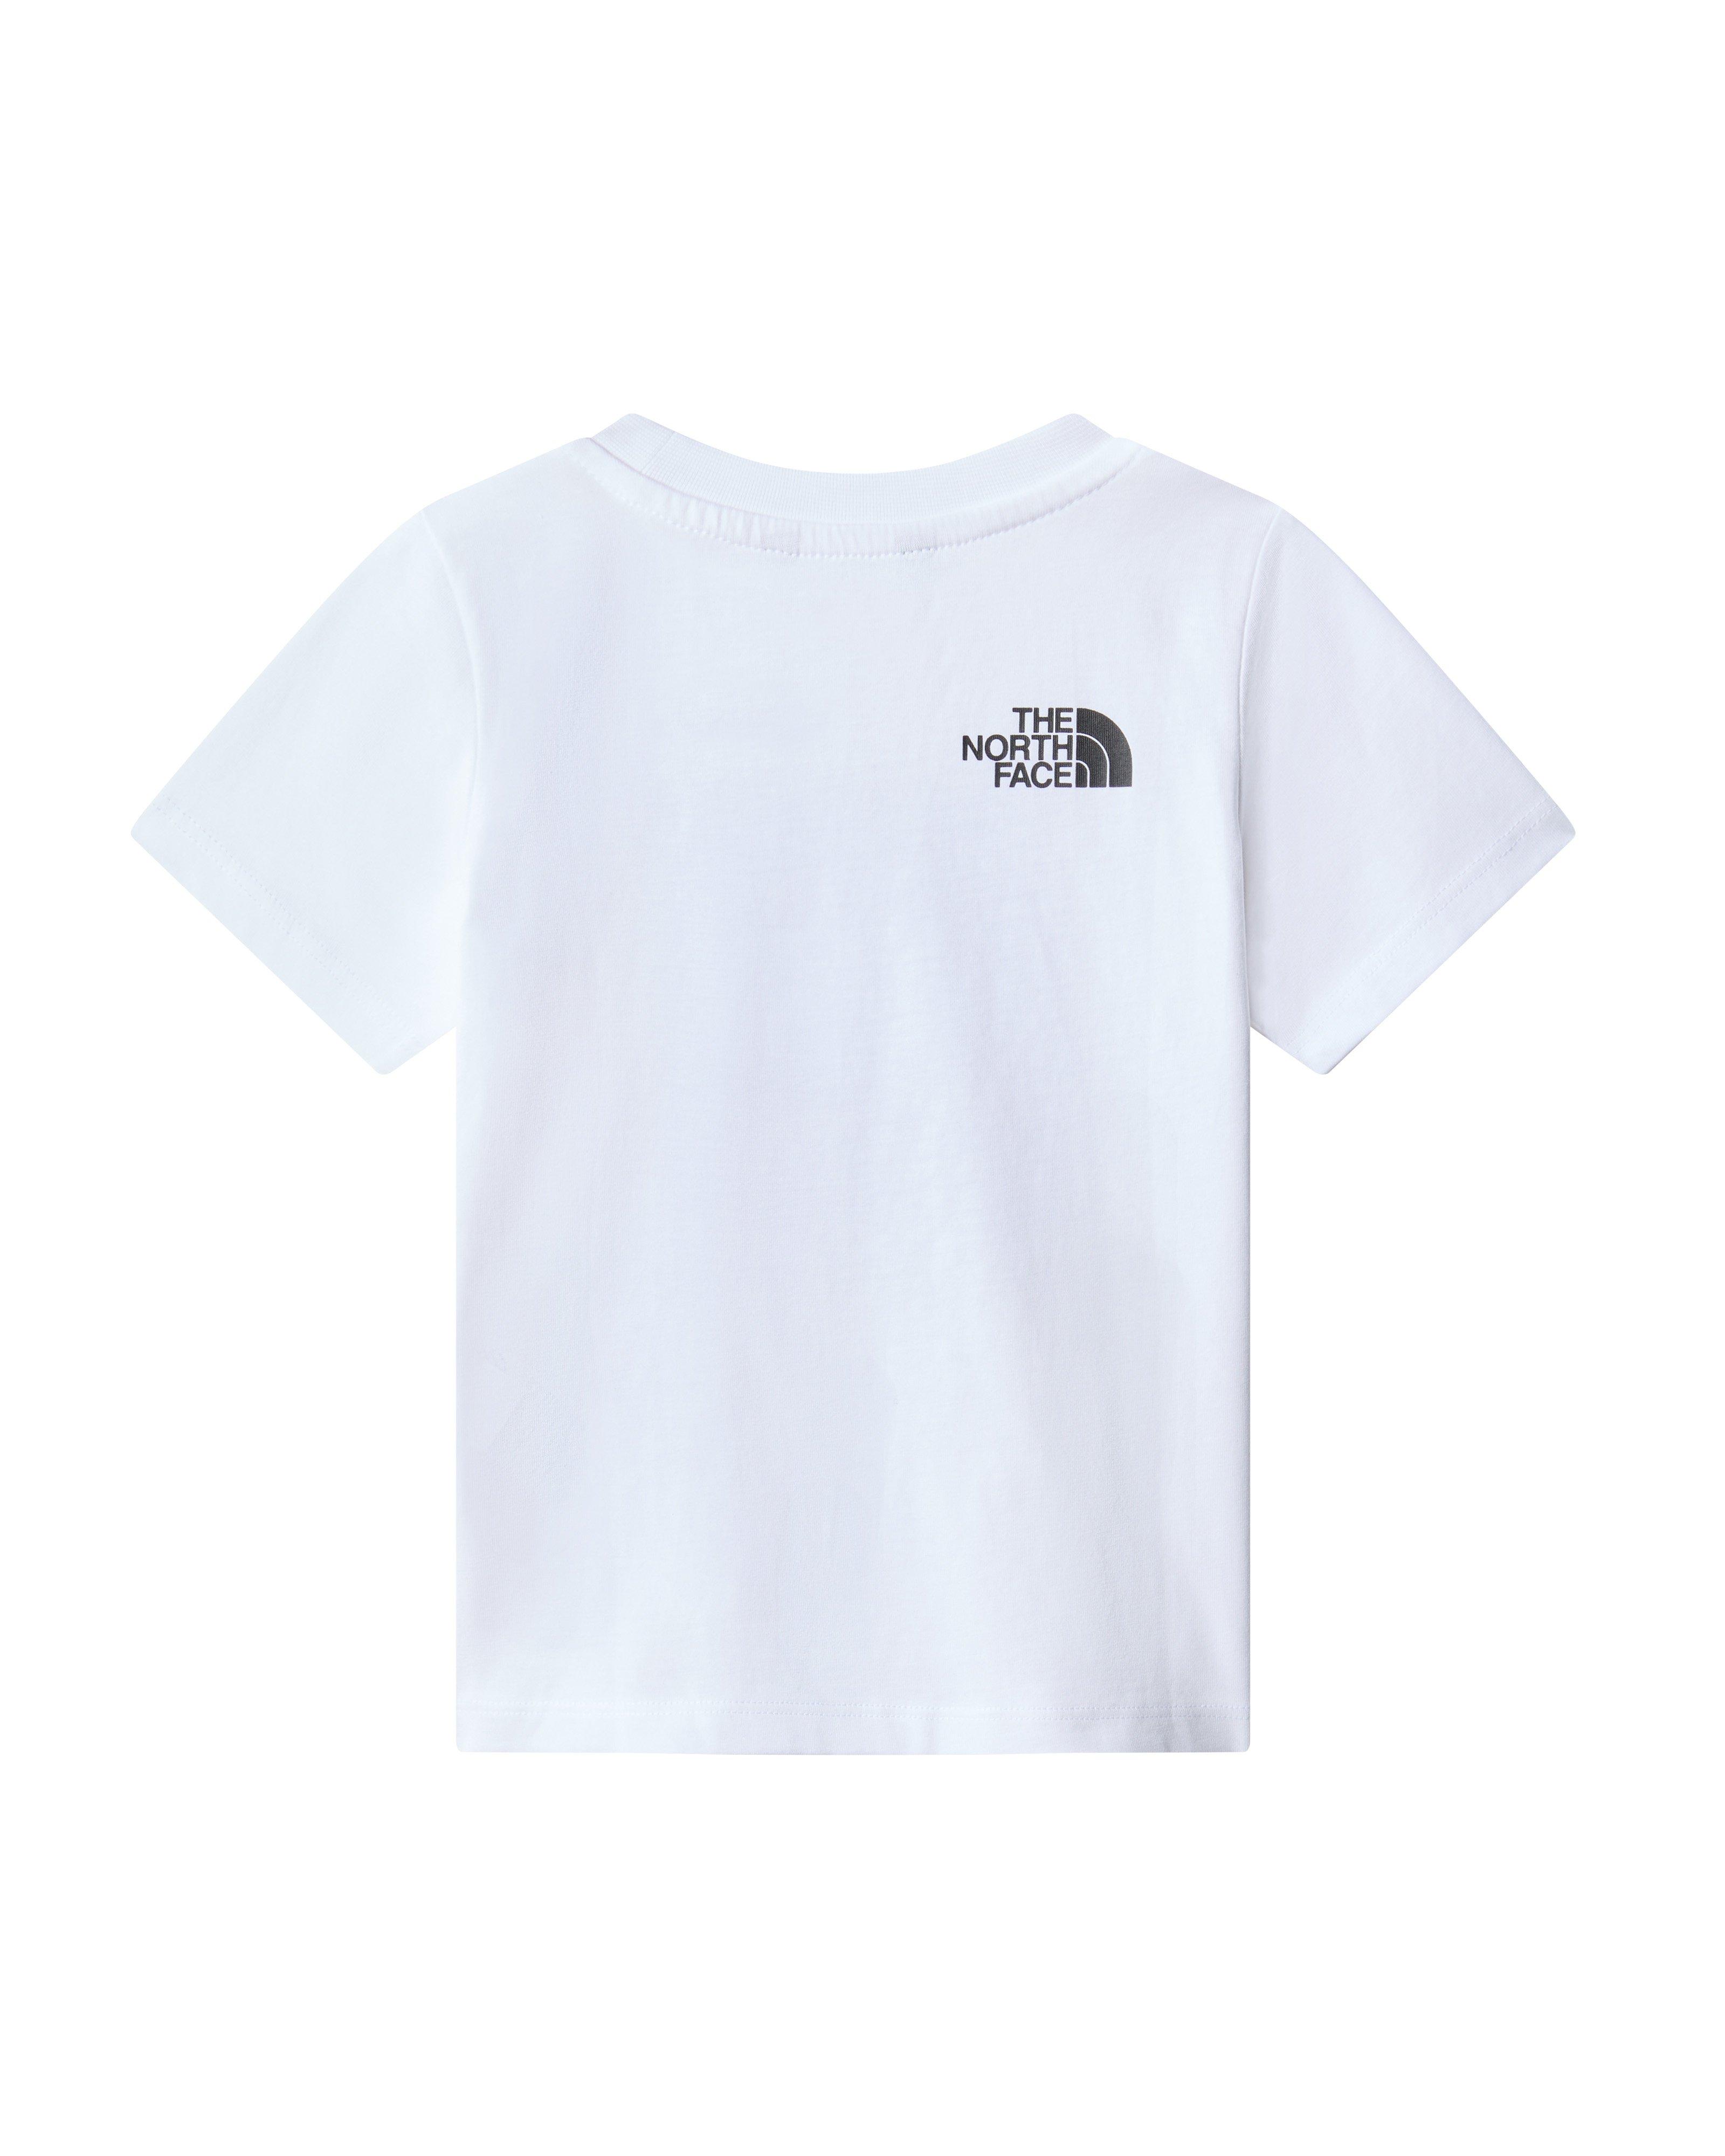 The North Face Kids Lifestyle Graphic T-shirt -  White